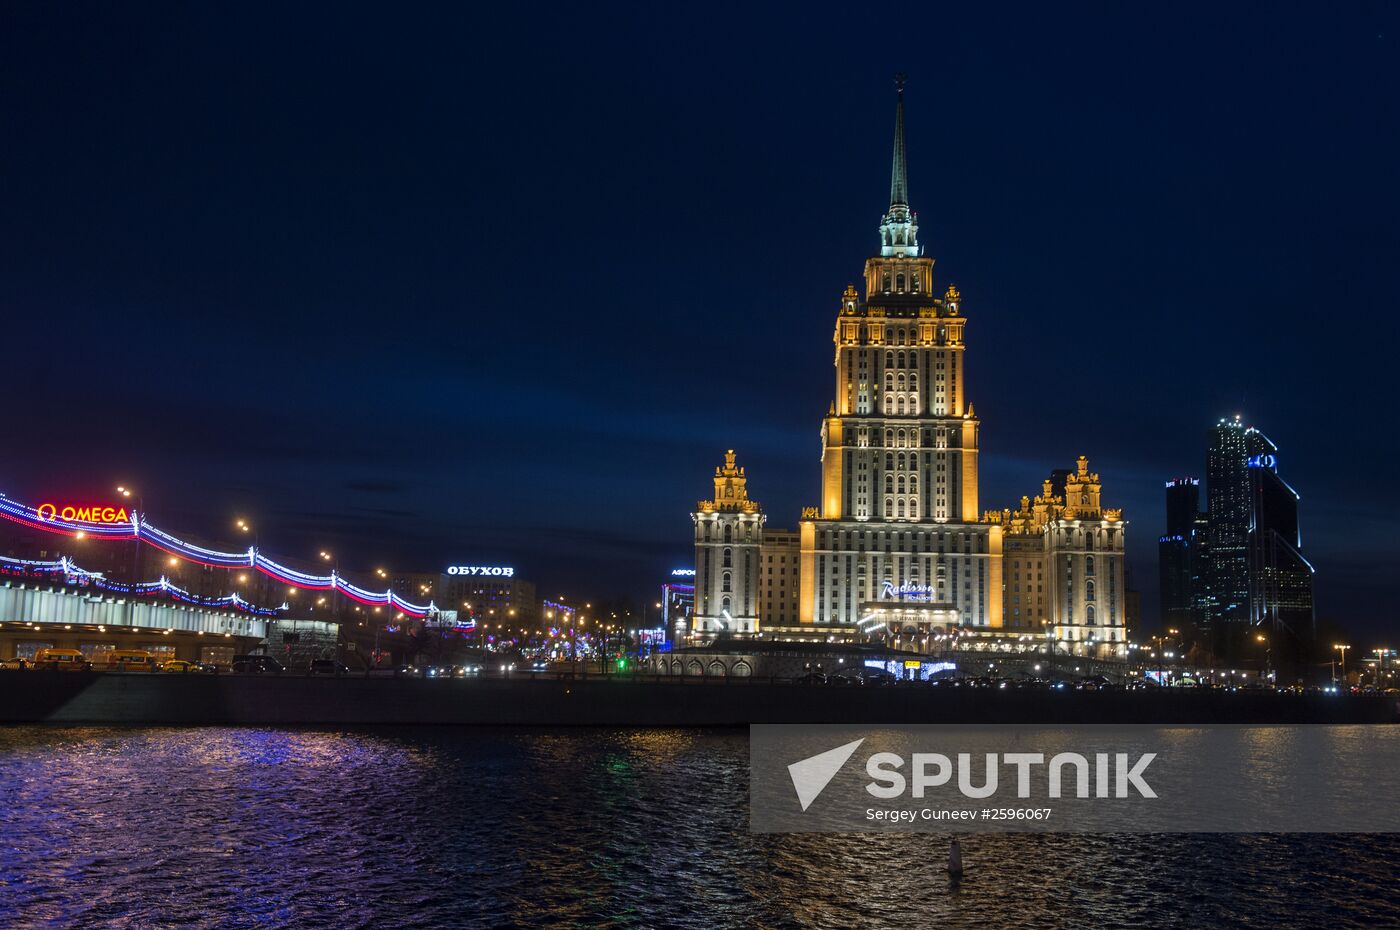 Earth Hour 2015 Event in Moscow